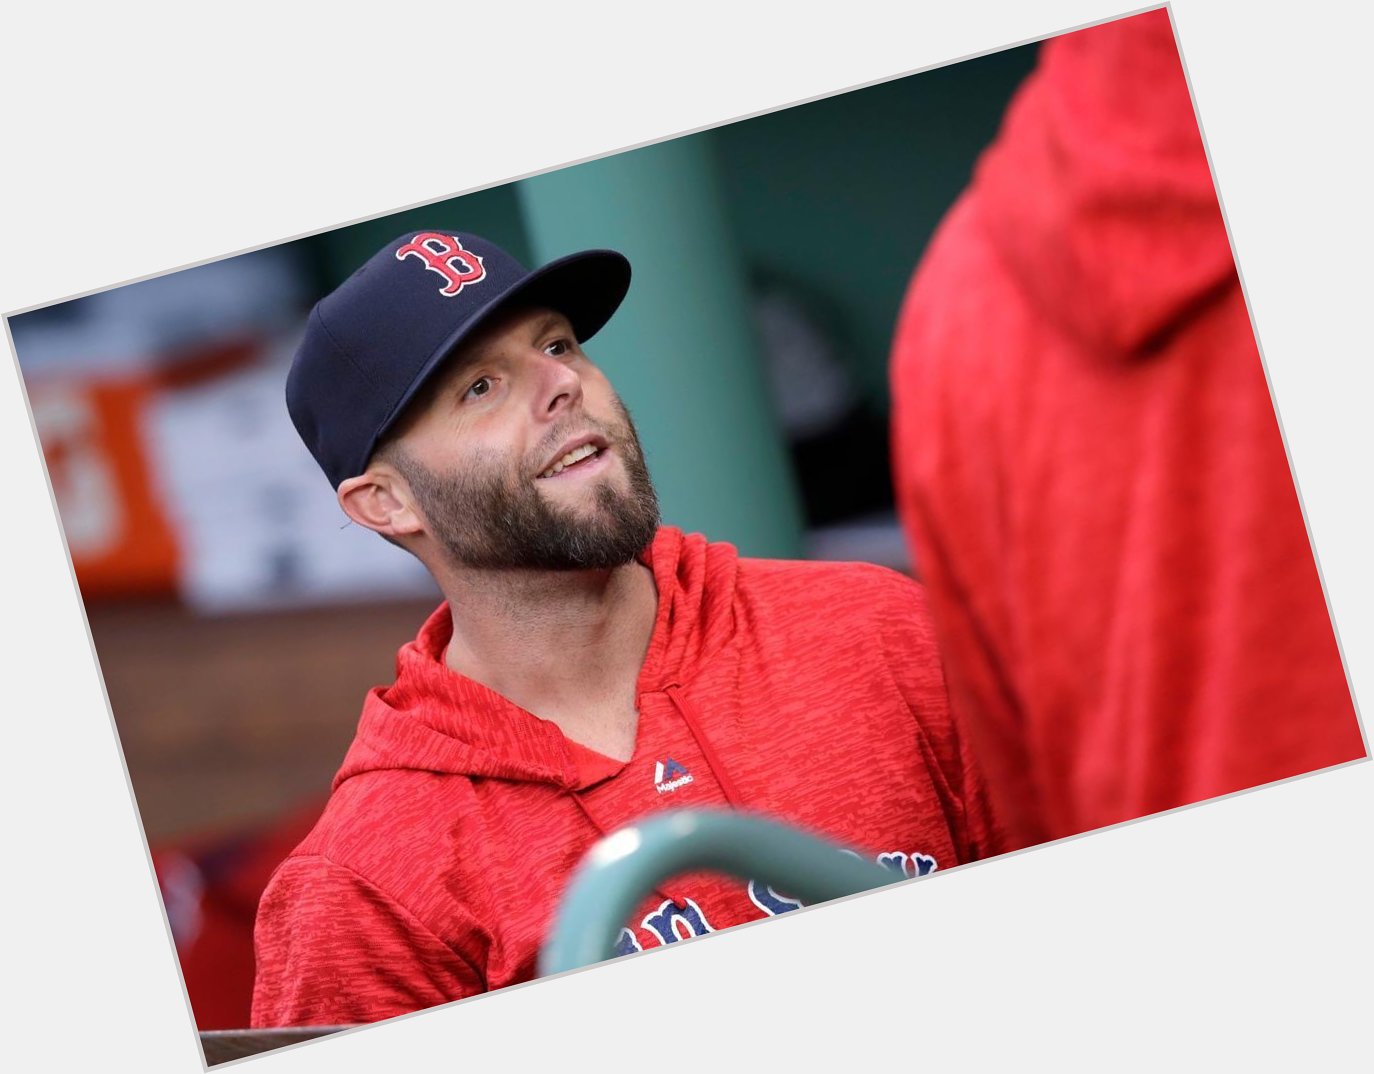 A very Happy 35th Birthday to second baseman, Dustin Pedroia!   